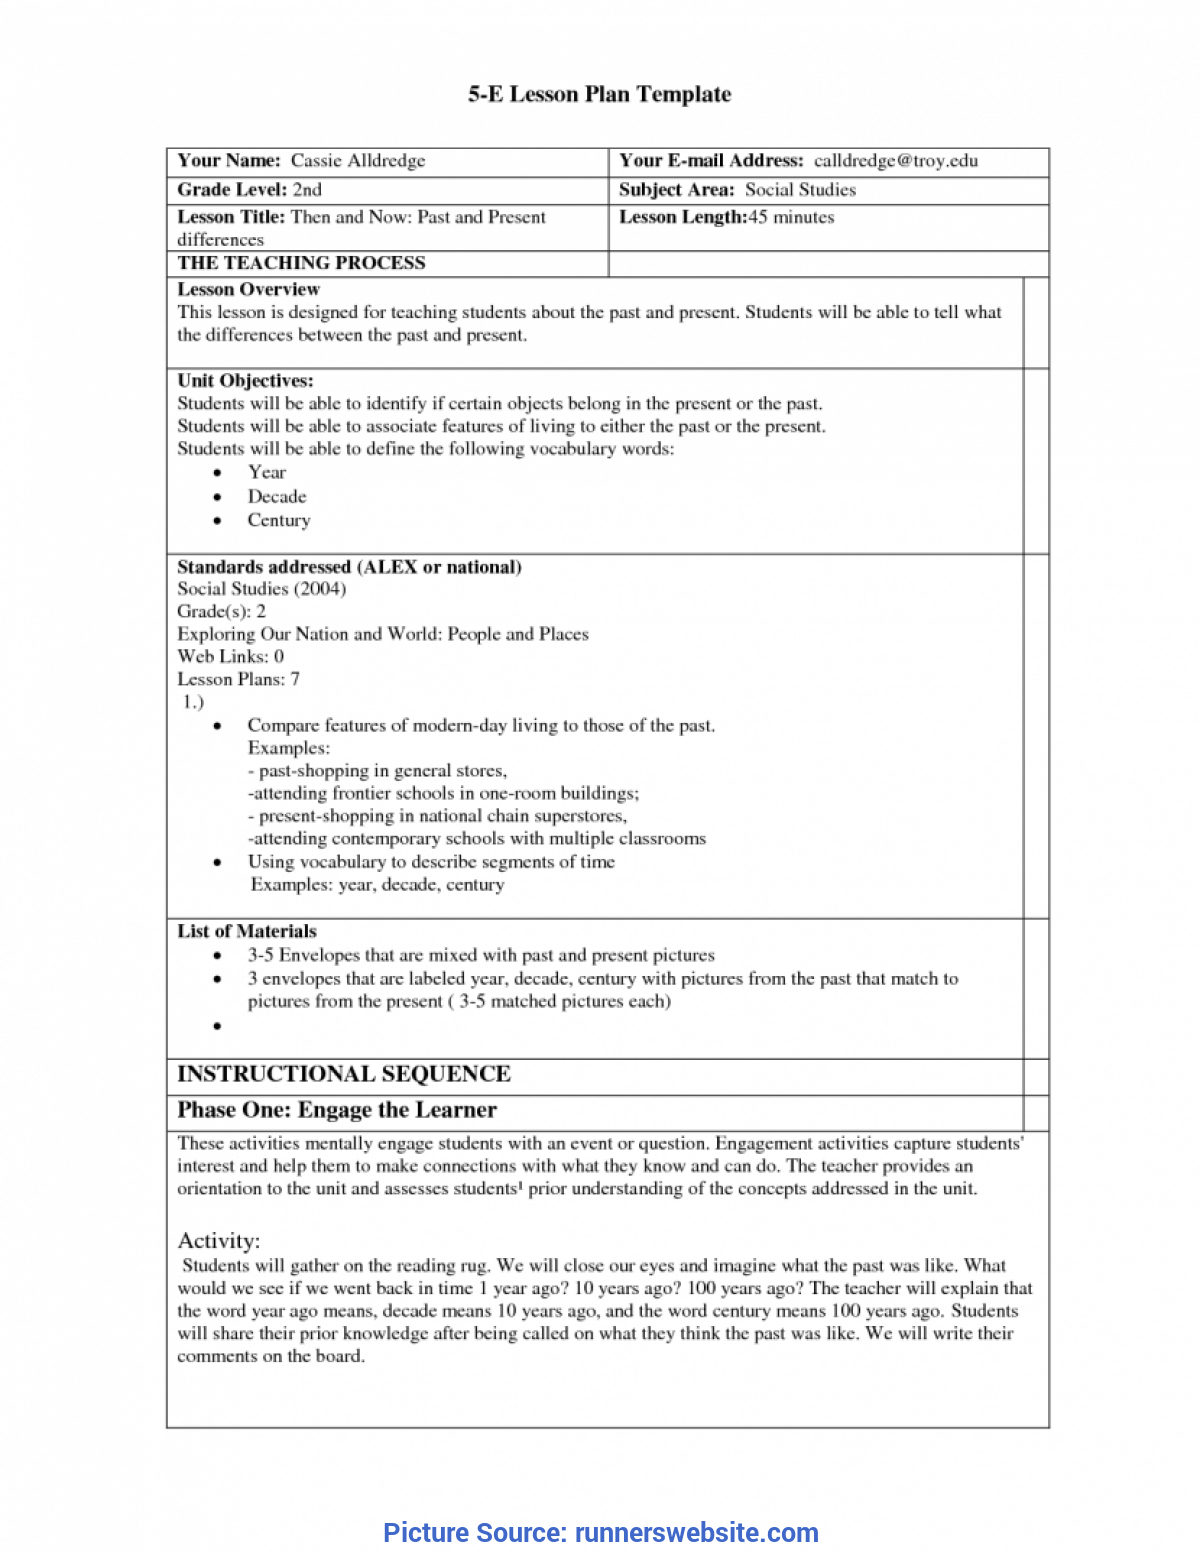 Best Model Lesson Plan For Science 5E Lesson Plan Template 7